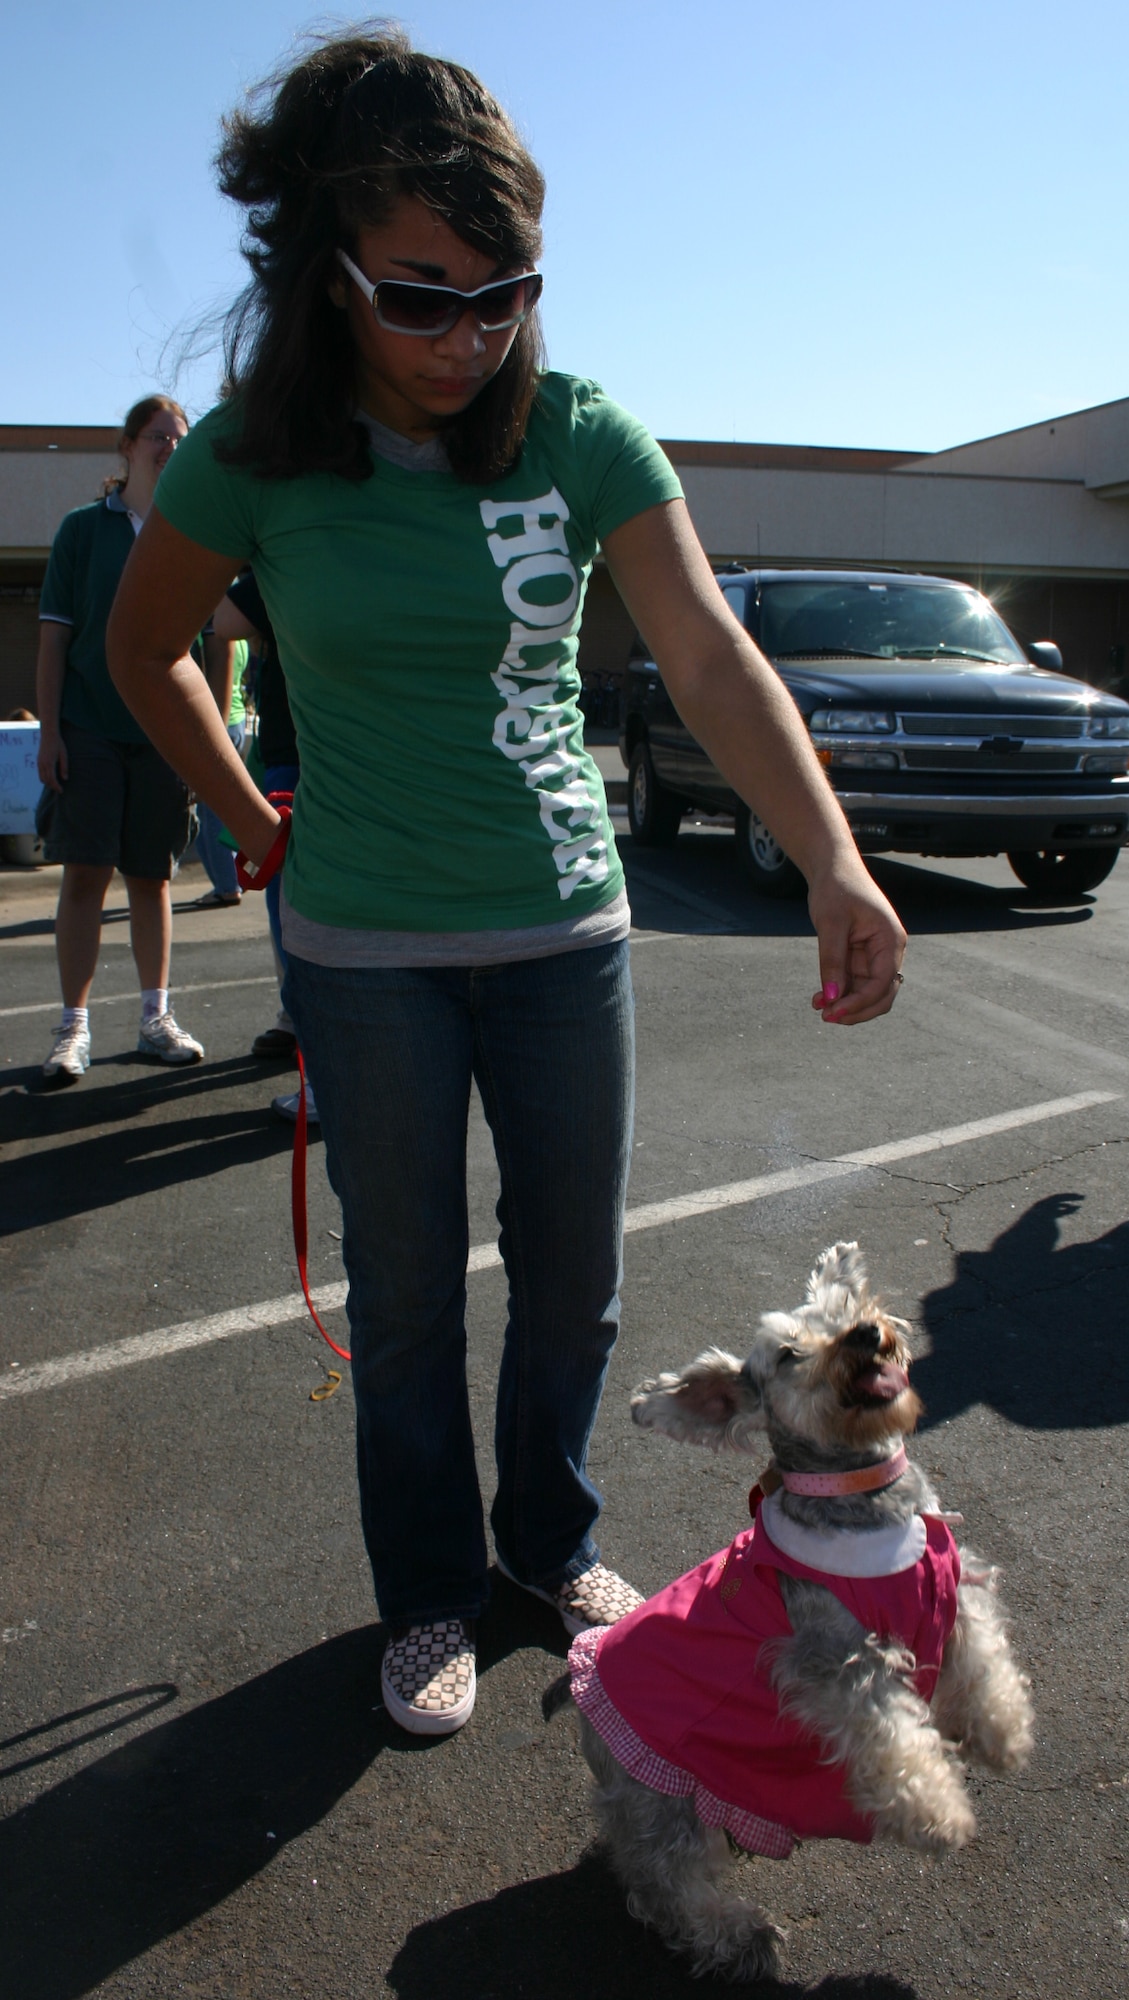 Reyna Thomas coaxes her dog, Sadie, into doing the dance that earned Sadie first place in the best trick category at the Dog Show in the base exchange parking lot Oct. 13. (U.S. Air Force photo/Staff Sgt. Tonnette Thompson)